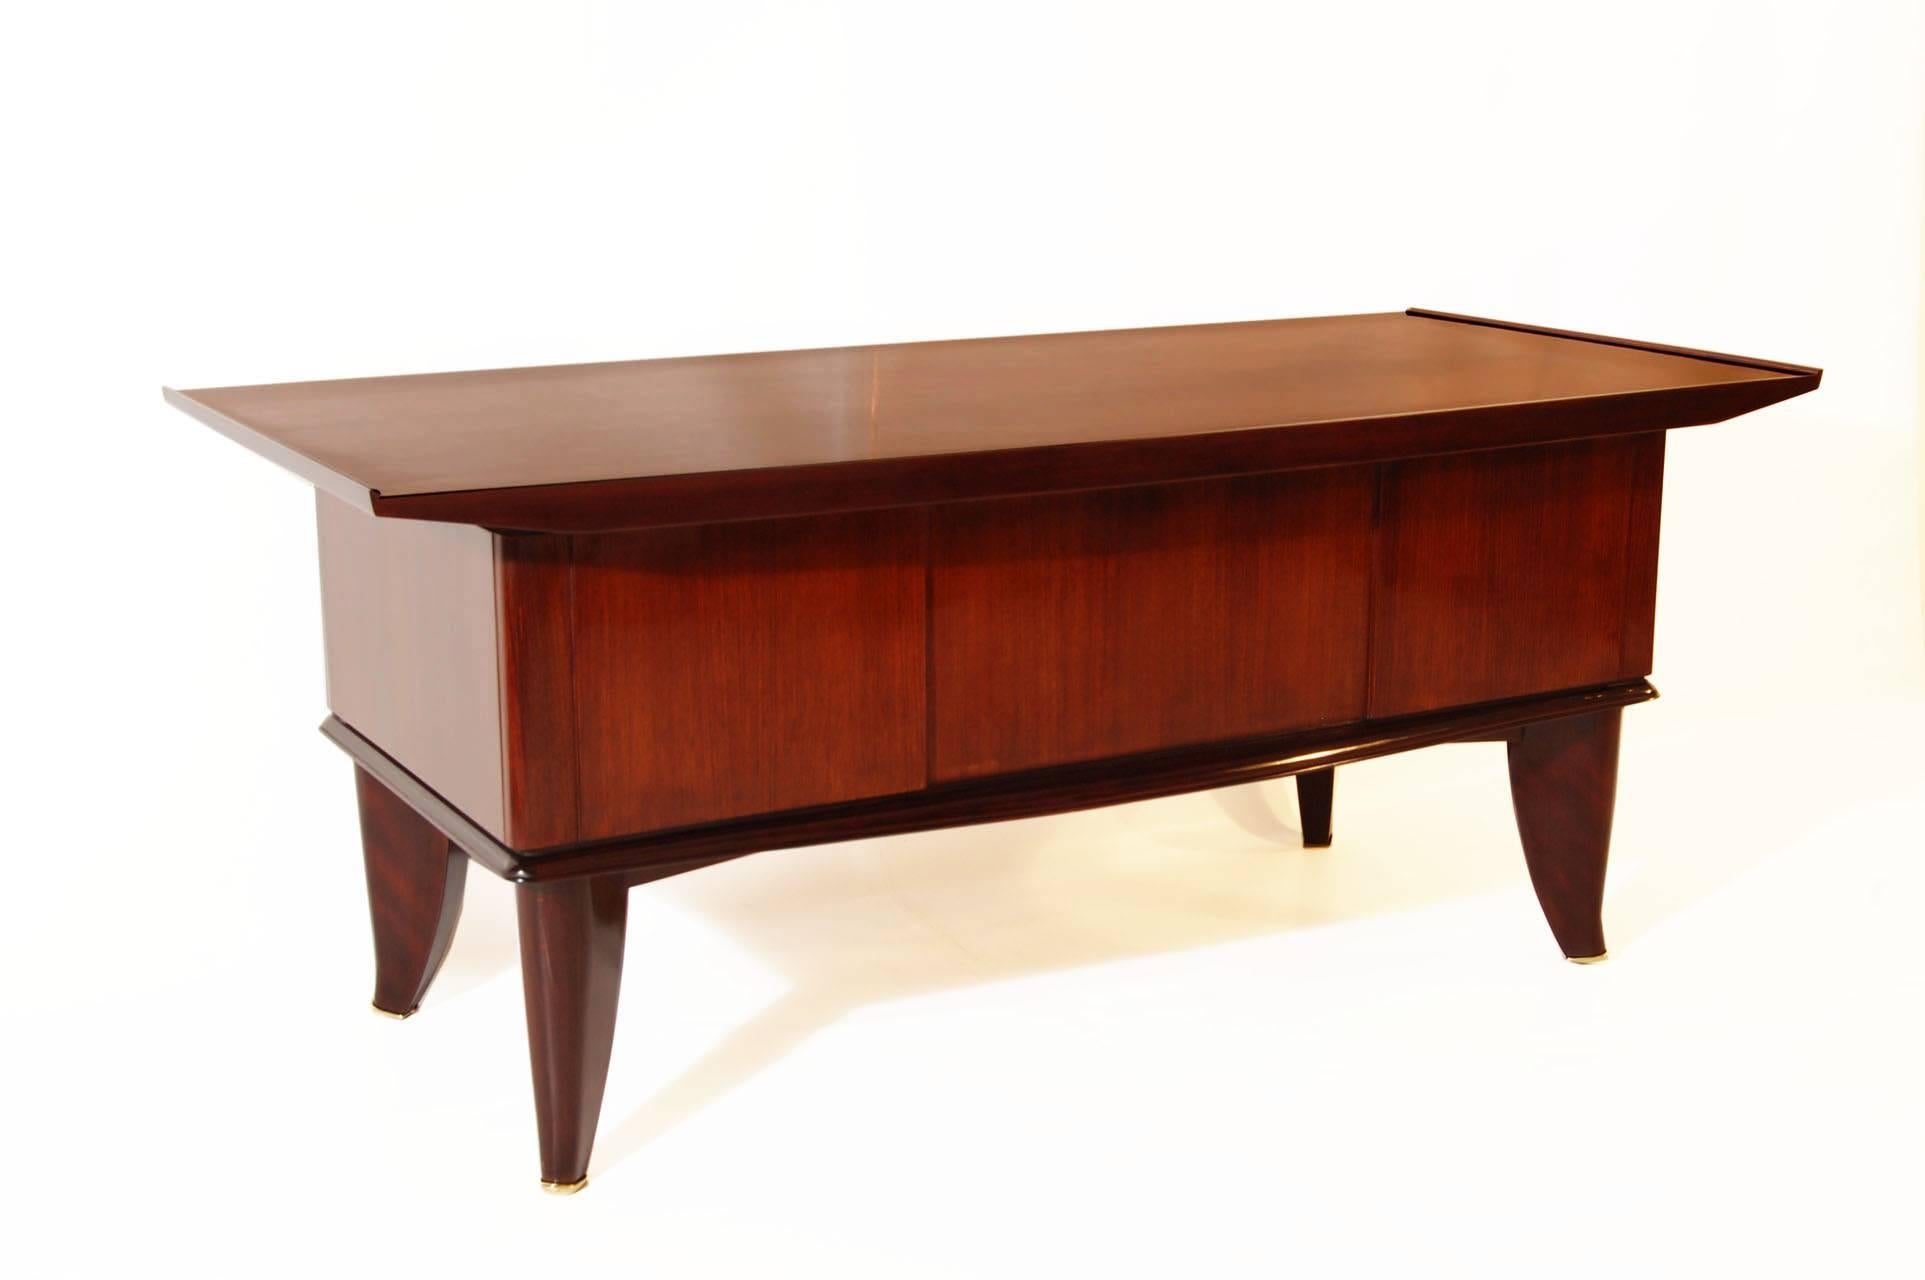 Beautiful rosewood desk with brass sabots and pulls, which was designed by Sanyas et Popot, Paris.
Very typical and elegant Art Deco design.